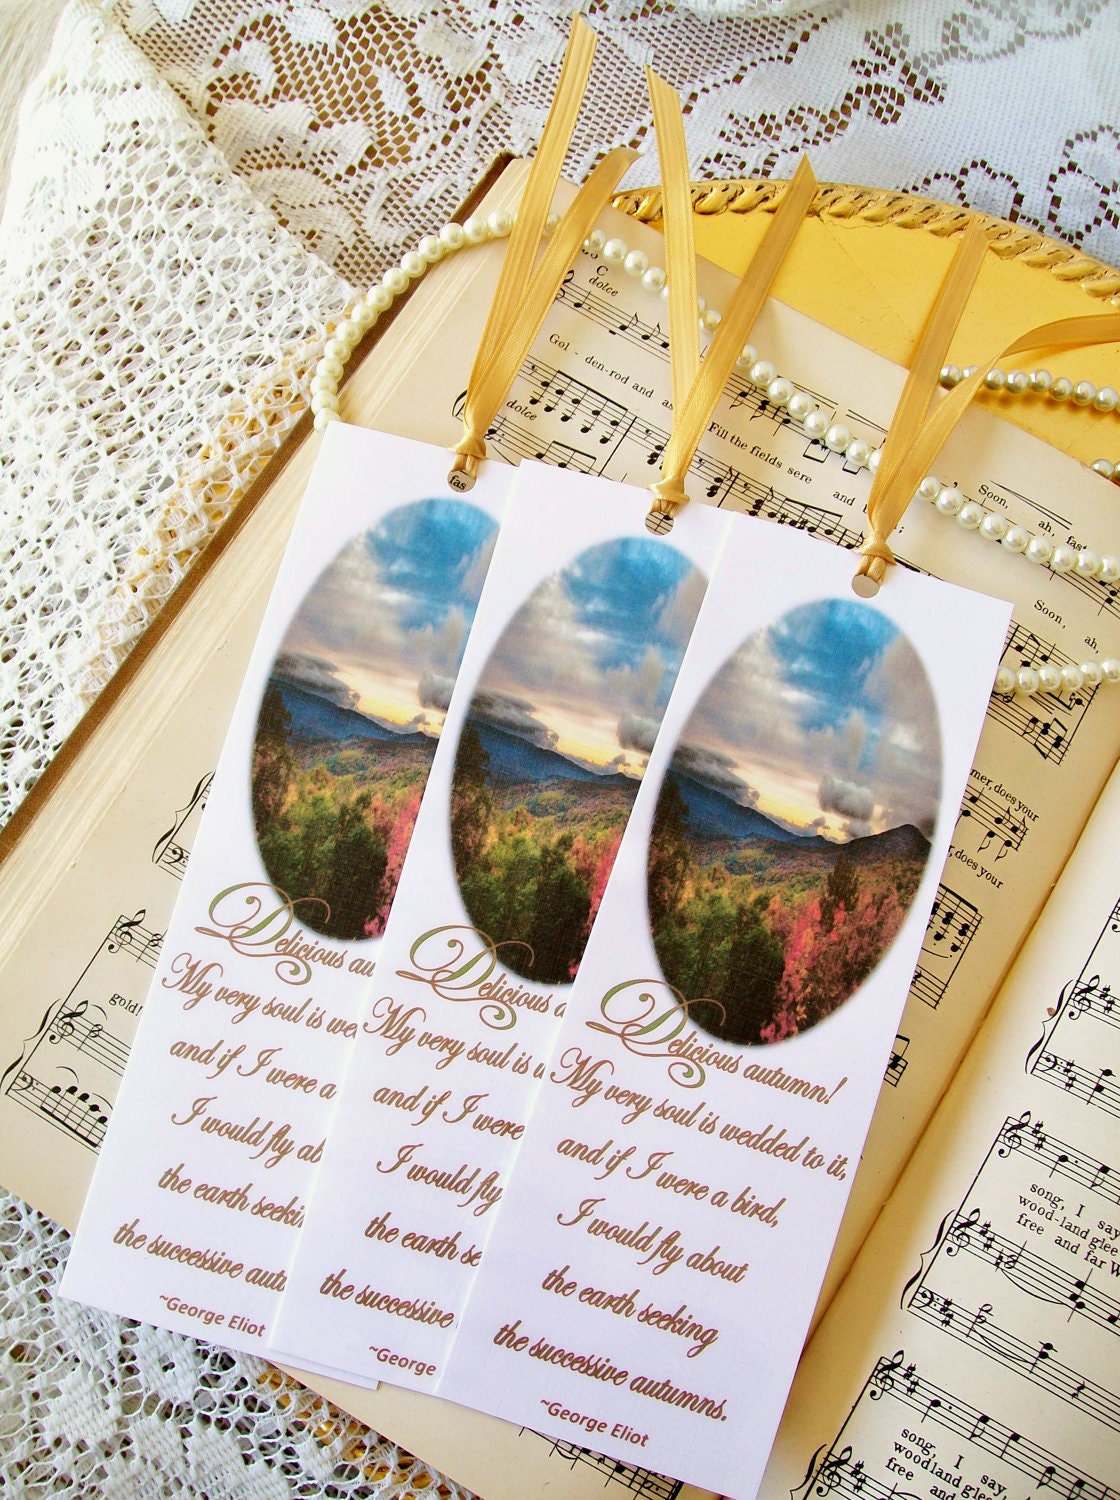 Bookmarks Poetry by George Eliot Autumn Colors Welcome Fall and Autumn